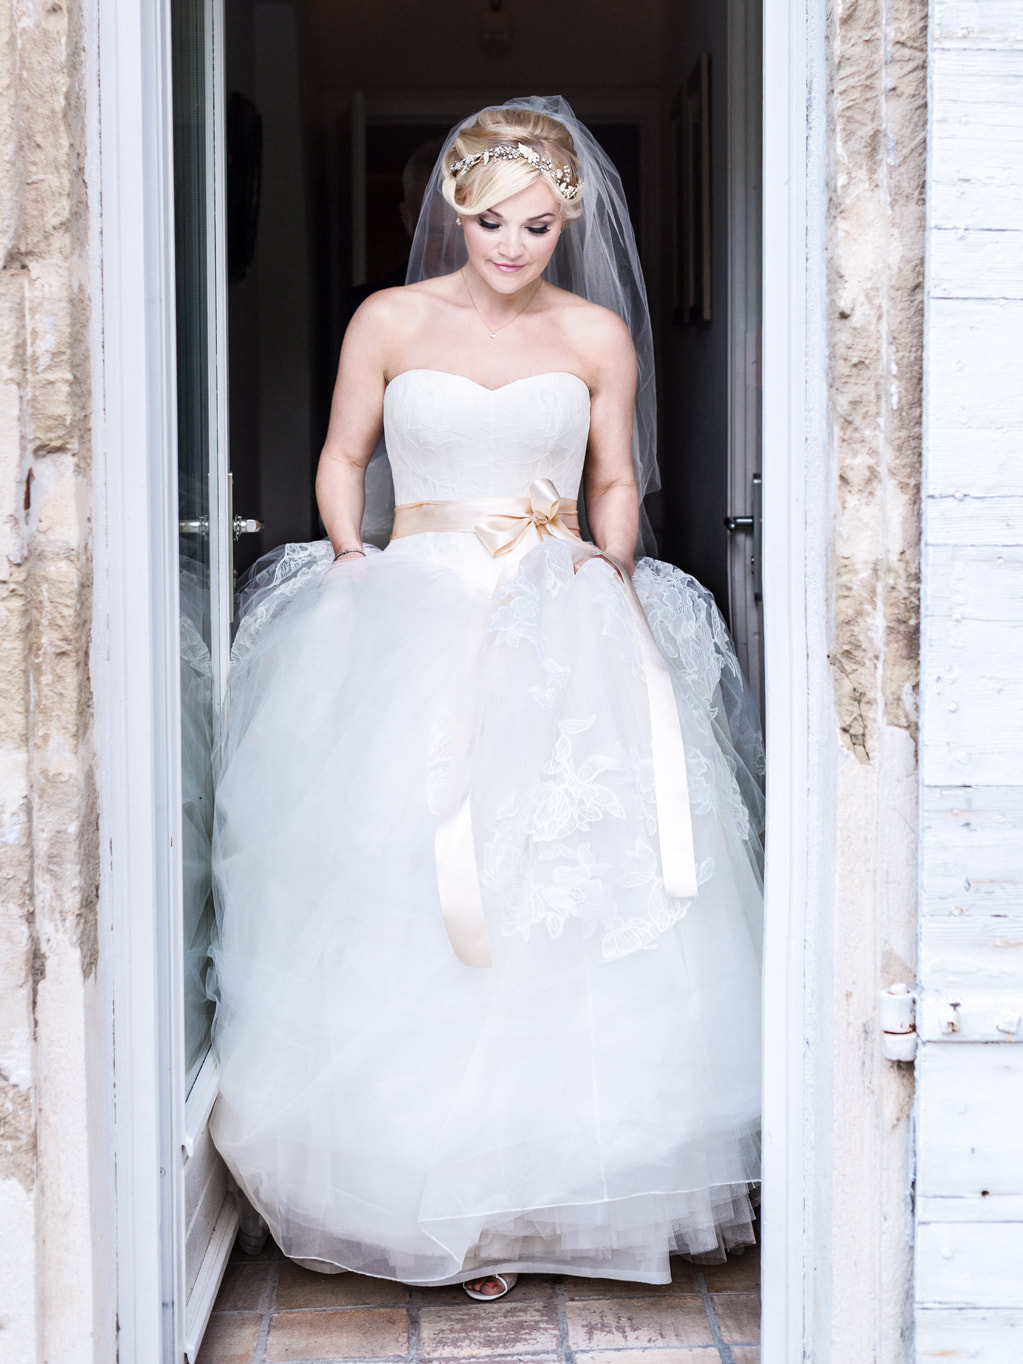 Our wedding in Provence part 2 at Chateau de Massillan by The Belle Blog. Dress by Vera Wang